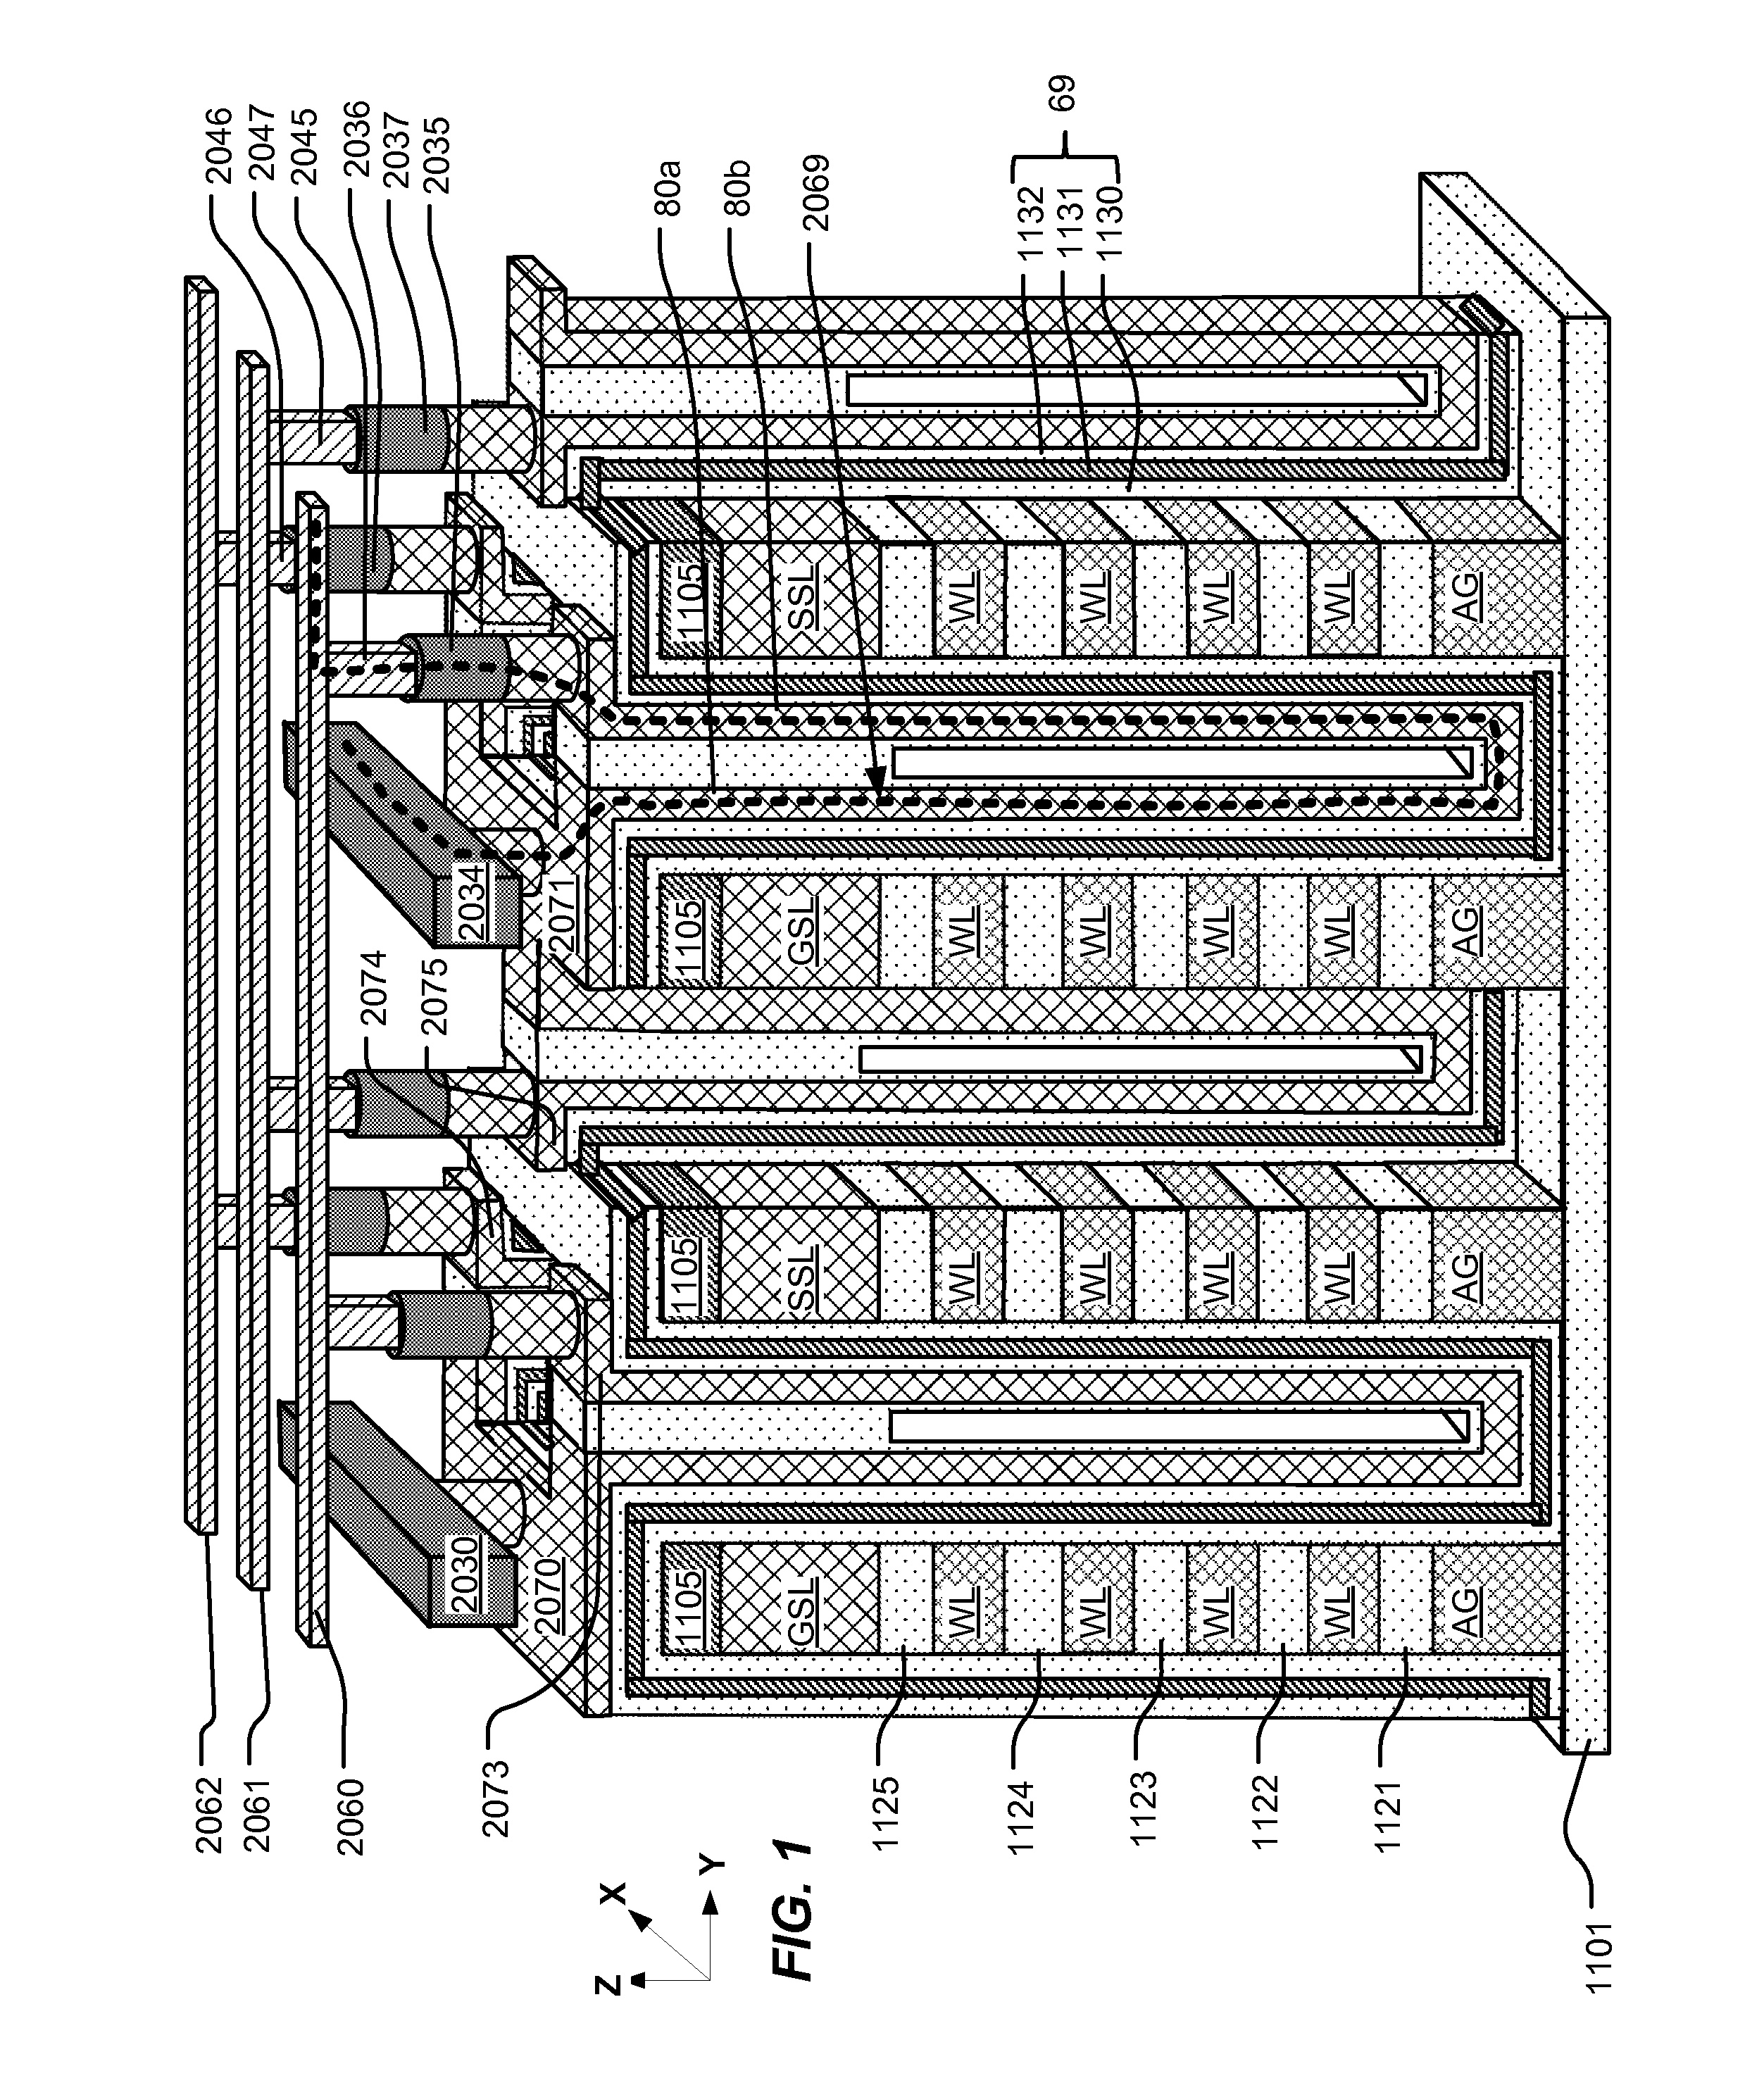 Reference line and bit line structure for 3D memory